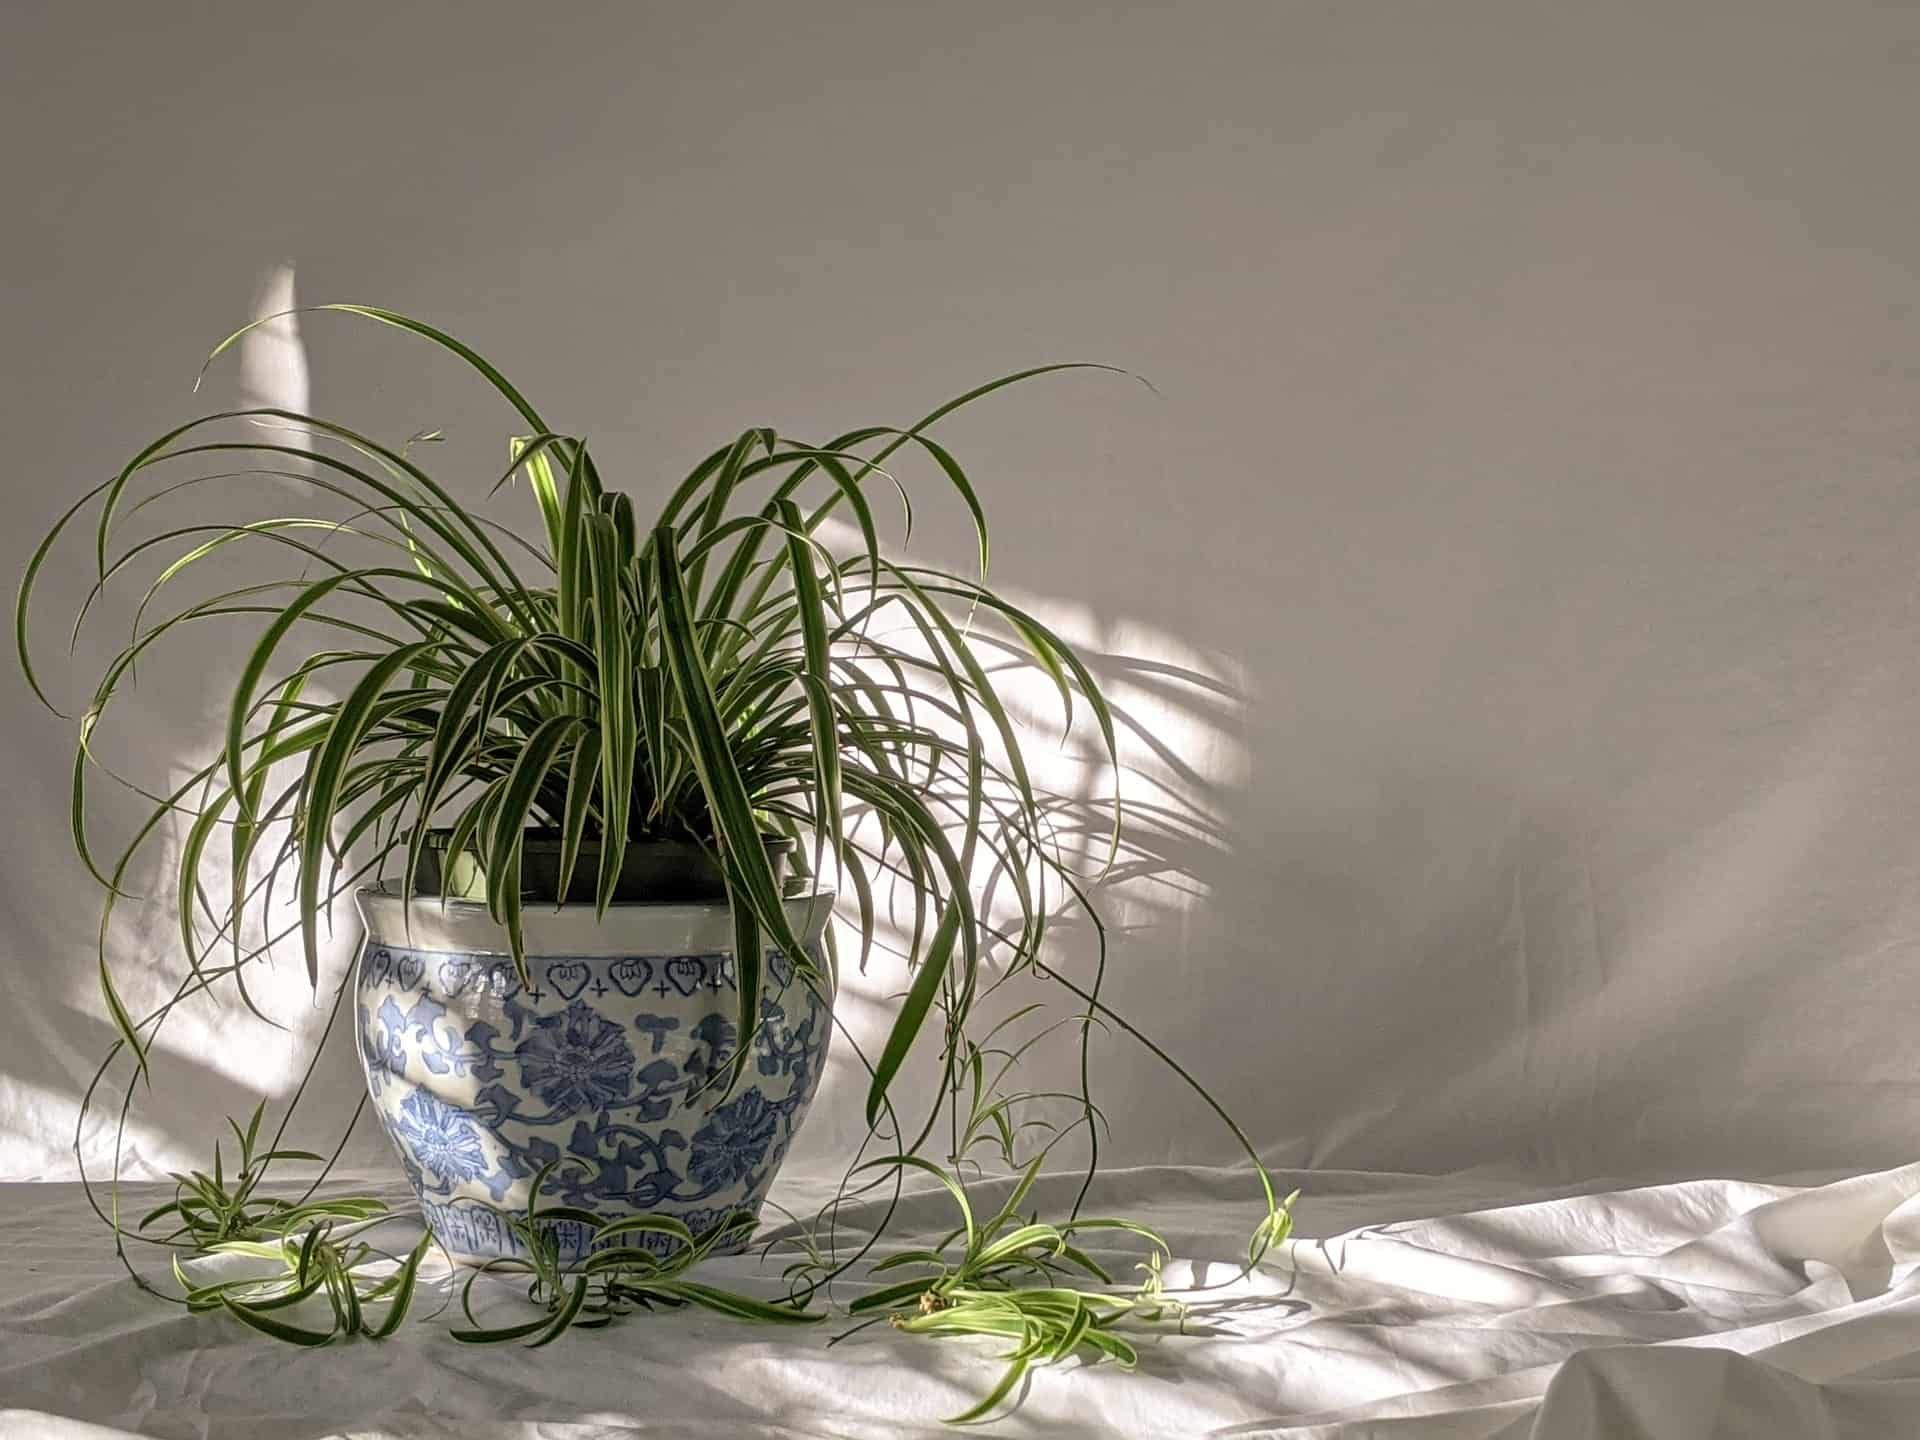 Spider plant in a blue and white ceramic pot,the shade